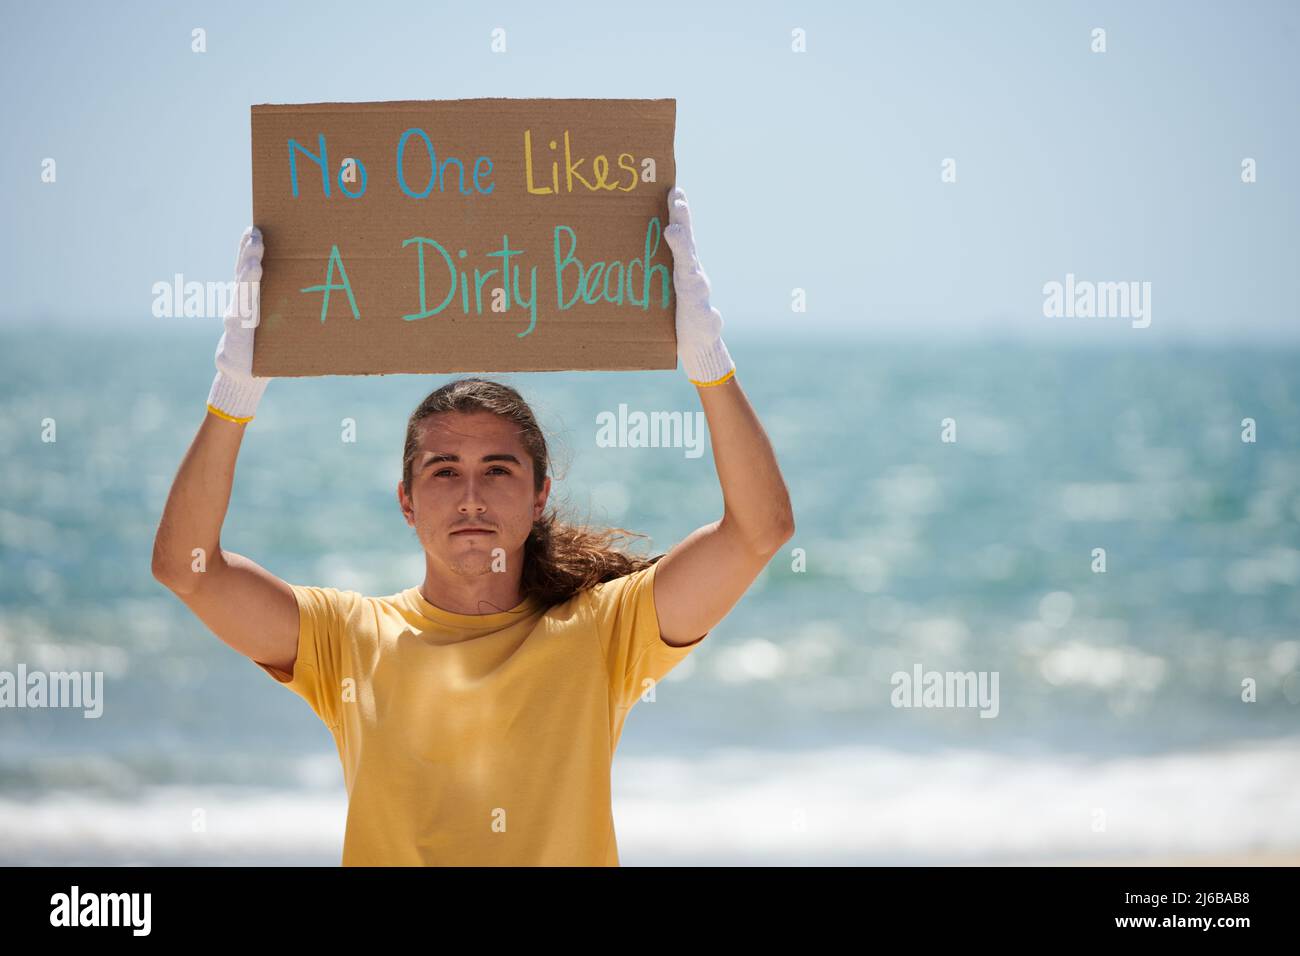 Young man showing no one likes dirty beach placard her made for protest Stock Photo